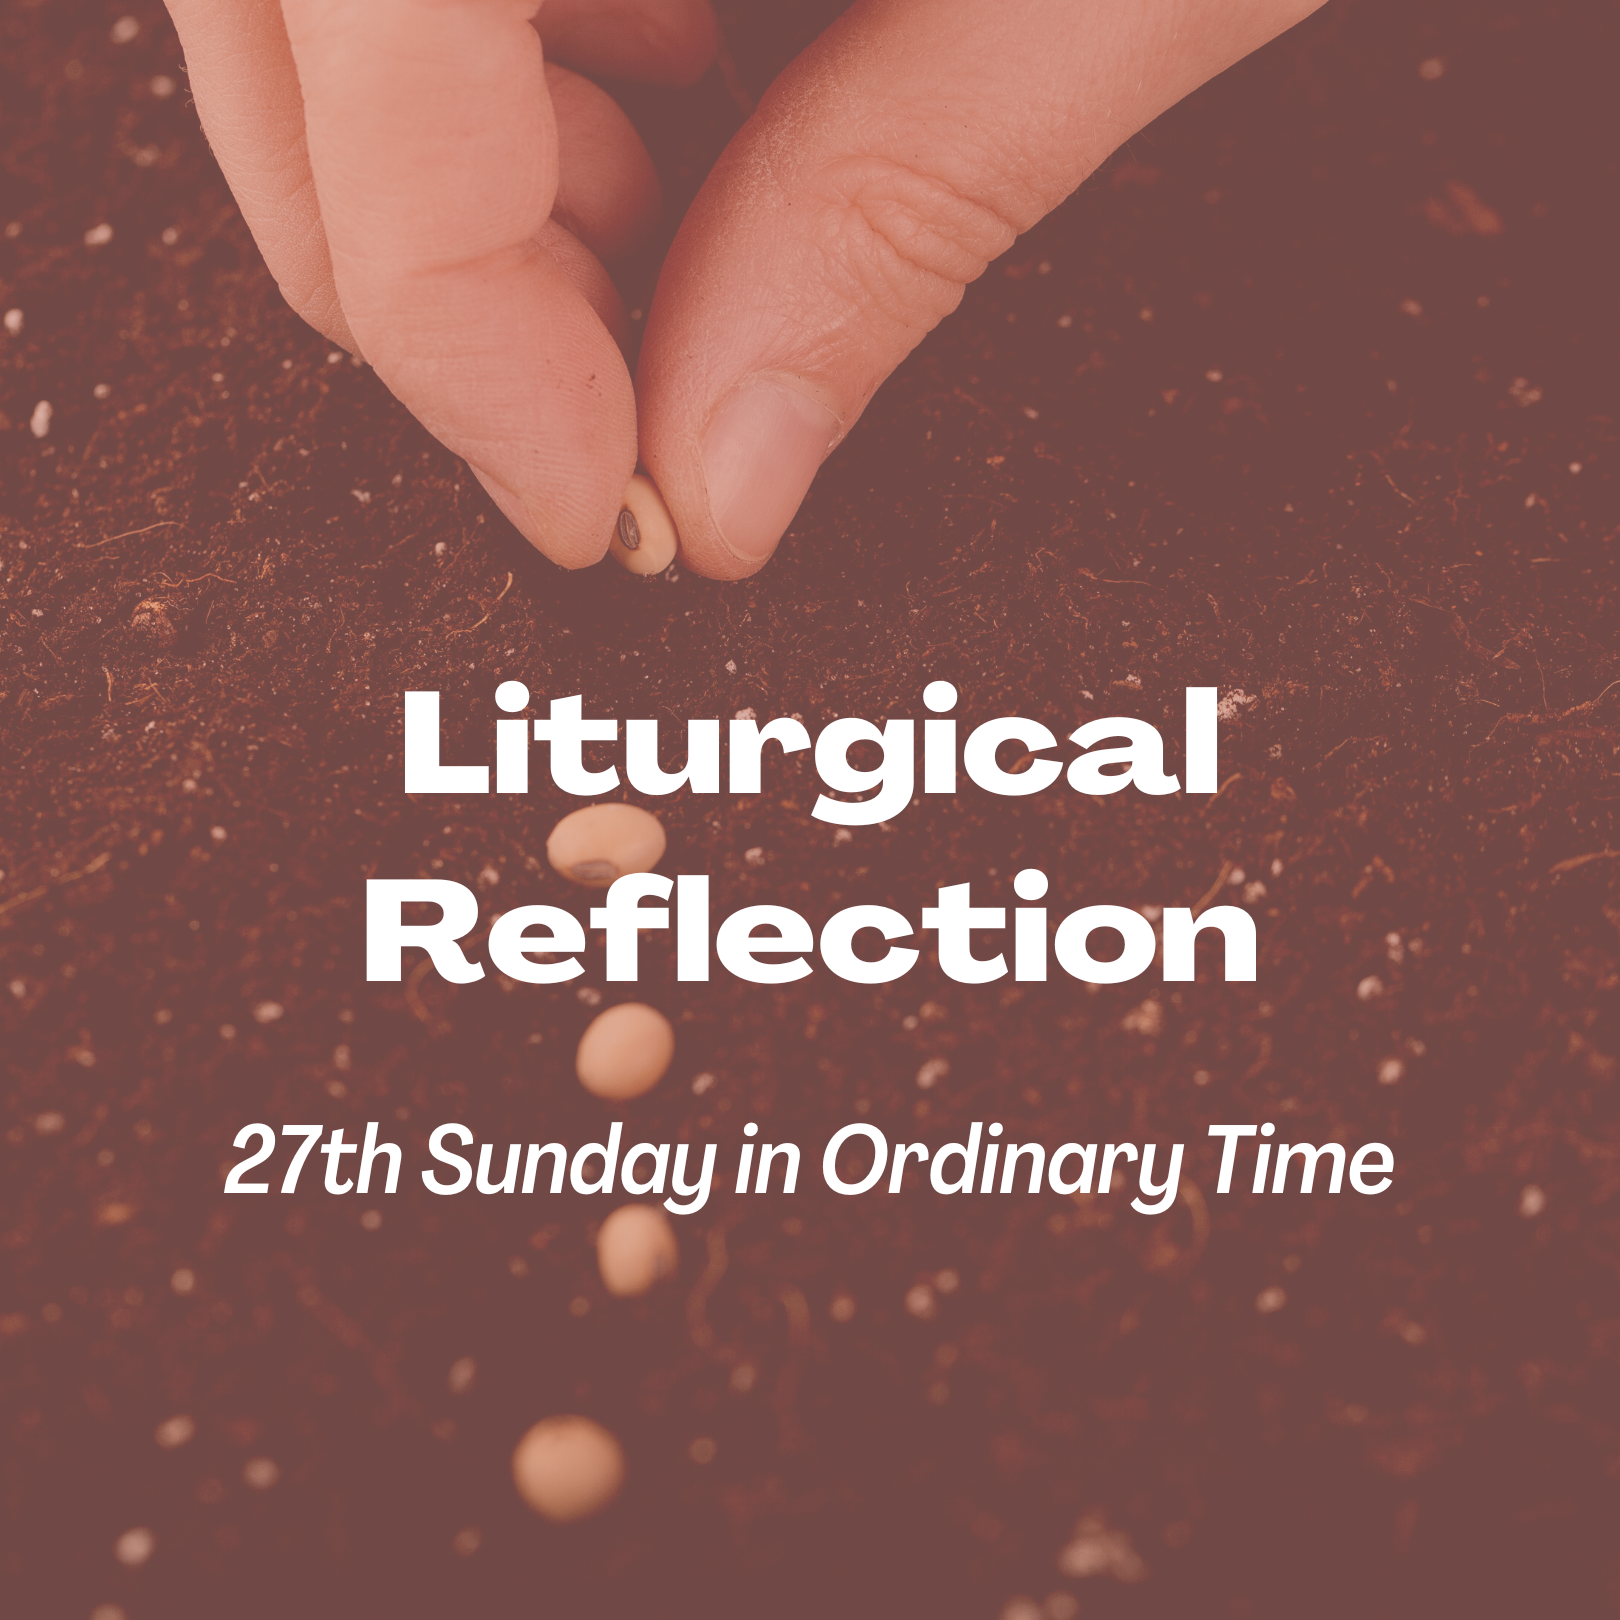 Liturgical Reflection for 27th Sunday in Ordinary Time in Year C